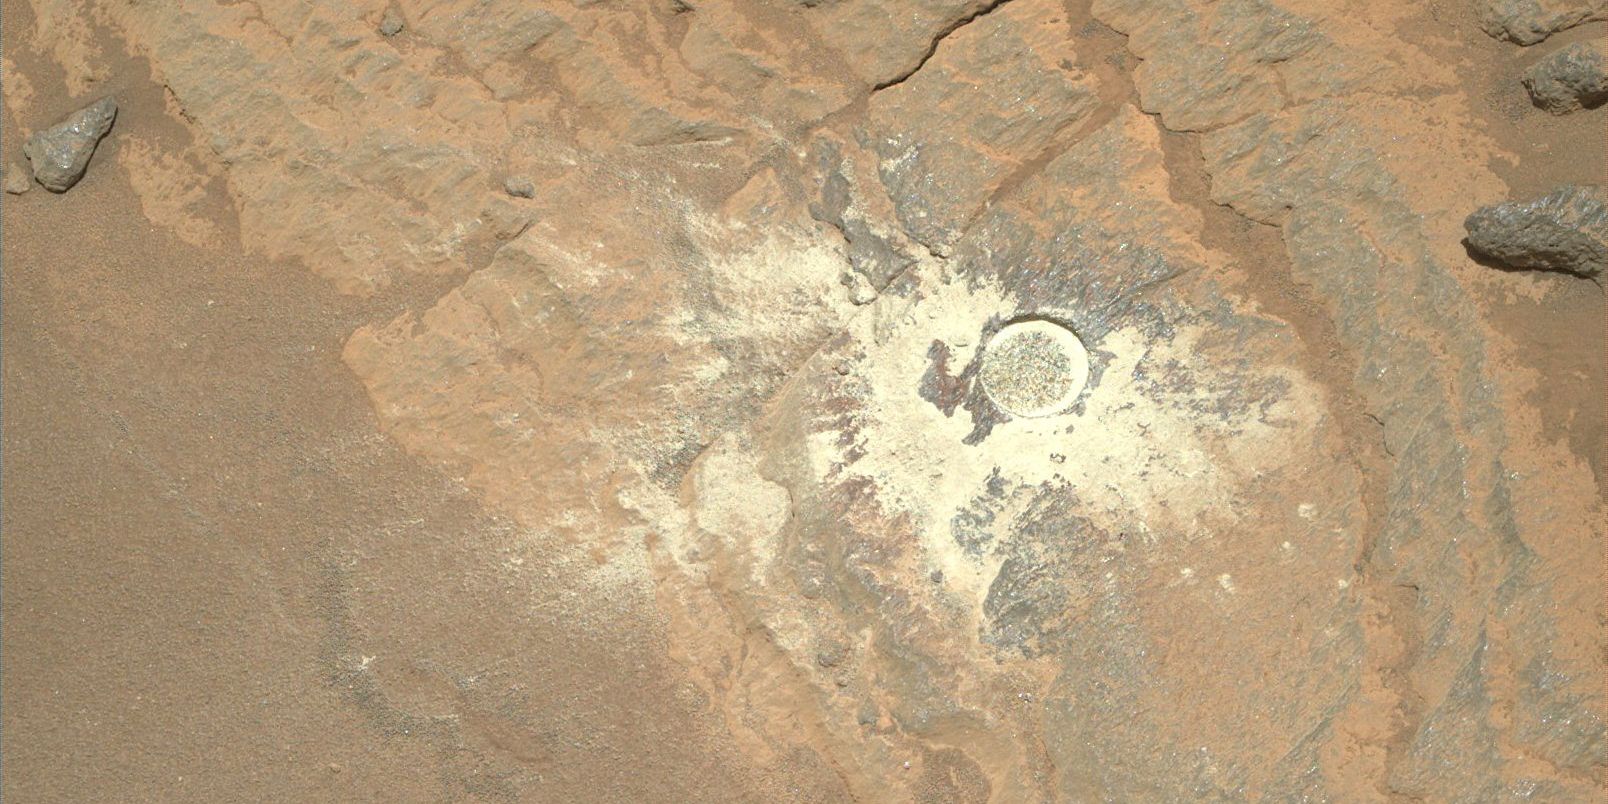 Martian rock that Perseverance has started digging into